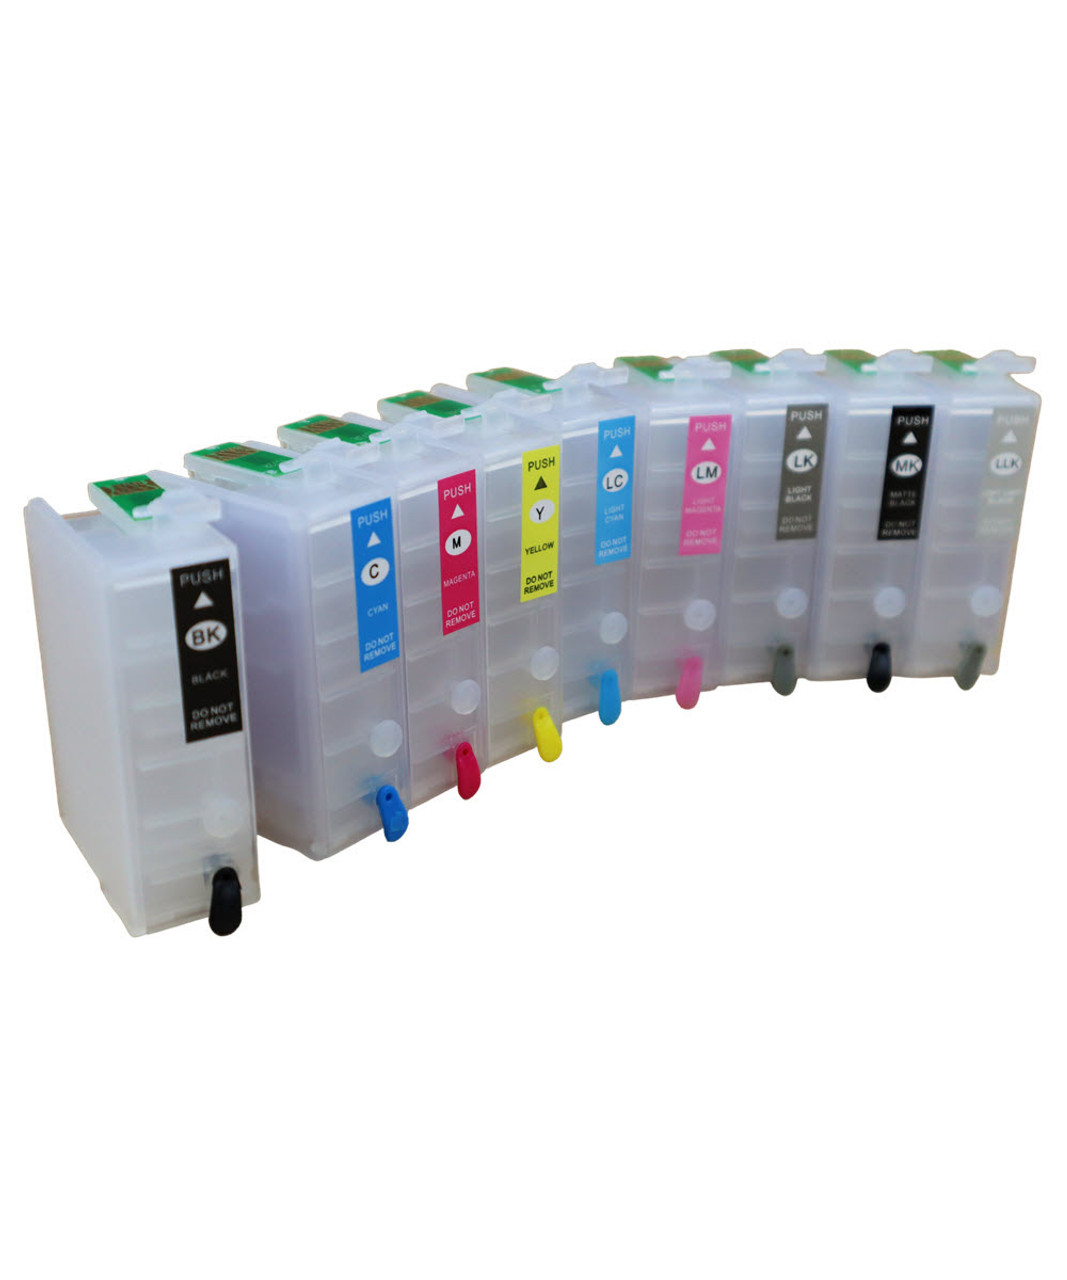 9 Refillable Ink Cartridges 25.9ml each (empty) with Auto Reset Chips installed for Epson SureColor P600 Printer